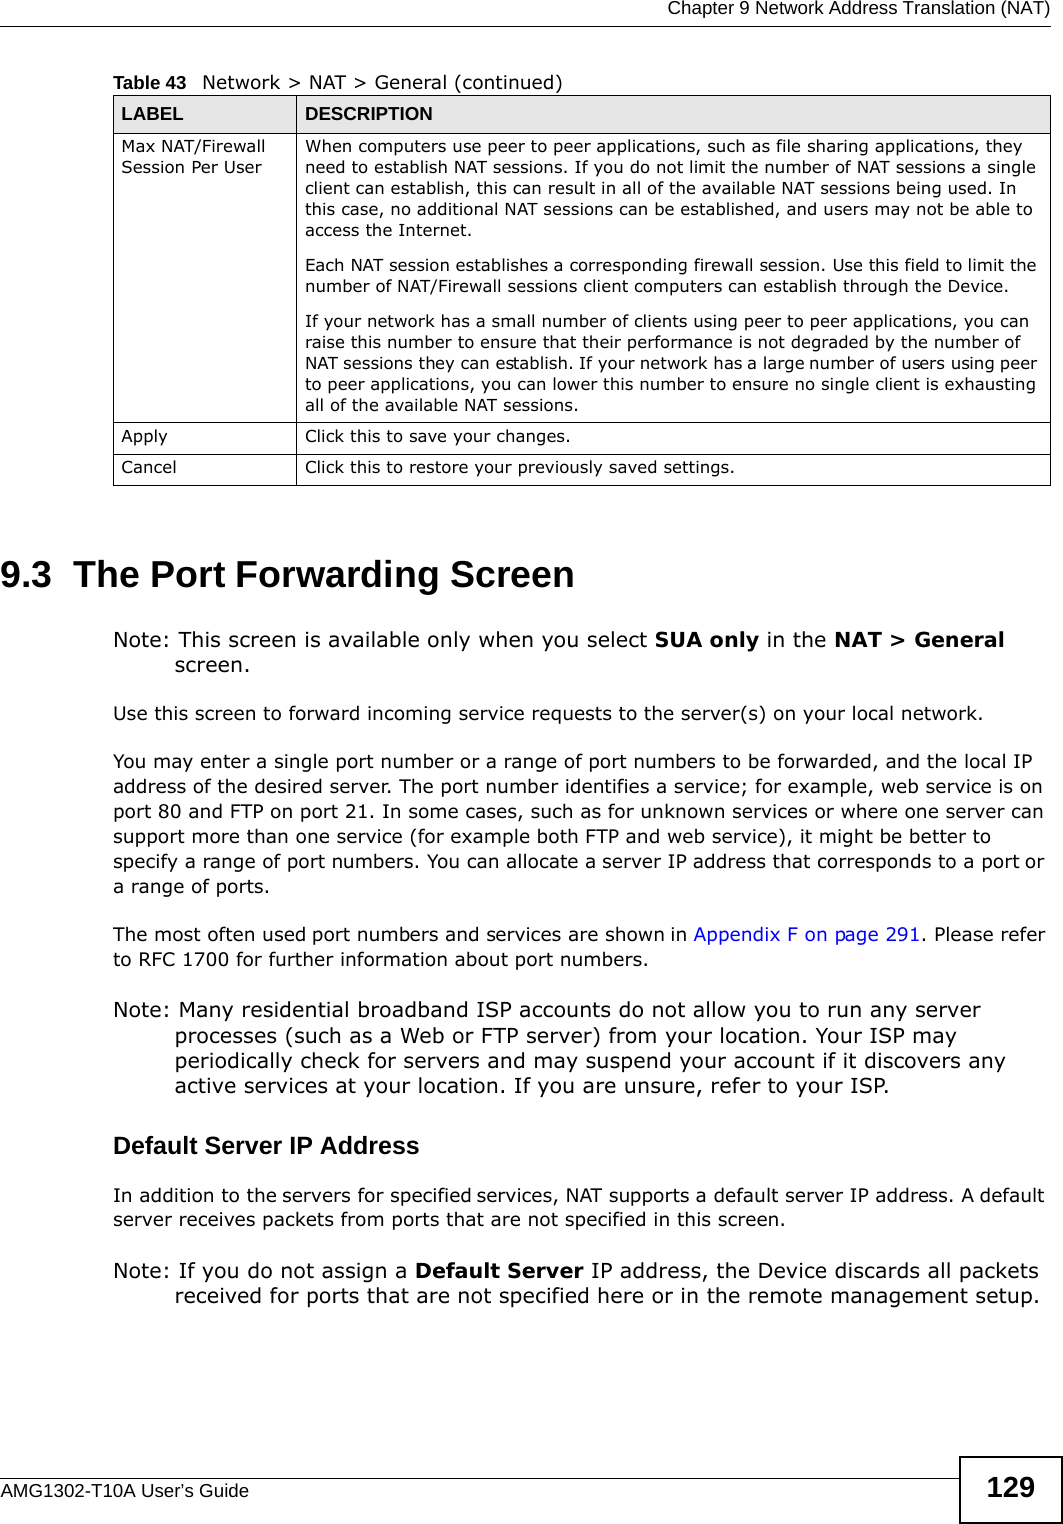  Chapter 9 Network Address Translation (NAT)AMG1302-T10A User’s Guide 1299.3  The Port Forwarding ScreenNote: This screen is available only when you select SUA only in the NAT &gt; General screen.Use this screen to forward incoming service requests to the server(s) on your local network.You may enter a single port number or a range of port numbers to be forwarded, and the local IP address of the desired server. The port number identifies a service; for example, web service is on port 80 and FTP on port 21. In some cases, such as for unknown services or where one server can support more than one service (for example both FTP and web service), it might be better to specify a range of port numbers. You can allocate a server IP address that corresponds to a port or a range of ports.The most often used port numbers and services are shown in Appendix F on page 291. Please refer to RFC 1700 for further information about port numbers. Note: Many residential broadband ISP accounts do not allow you to run any server processes (such as a Web or FTP server) from your location. Your ISP may periodically check for servers and may suspend your account if it discovers any active services at your location. If you are unsure, refer to your ISP.Default Server IP AddressIn addition to the servers for specified services, NAT supports a default server IP address. A default server receives packets from ports that are not specified in this screen.Note: If you do not assign a Default Server IP address, the Device discards all packets received for ports that are not specified here or in the remote management setup.Max NAT/Firewall Session Per UserWhen computers use peer to peer applications, such as file sharing applications, they need to establish NAT sessions. If you do not limit the number of NAT sessions a single client can establish, this can result in all of the available NAT sessions being used. In this case, no additional NAT sessions can be established, and users may not be able to access the Internet.Each NAT session establishes a corresponding firewall session. Use this field to limit the number of NAT/Firewall sessions client computers can establish through the Device.If your network has a small number of clients using peer to peer applications, you can raise this number to ensure that their performance is not degraded by the number of NAT sessions they can establish. If your network has a large number of users using peer to peer applications, you can lower this number to ensure no single client is exhausting all of the available NAT sessions.Apply Click this to save your changes.Cancel Click this to restore your previously saved settings.Table 43   Network &gt; NAT &gt; General (continued)LABEL DESCRIPTION